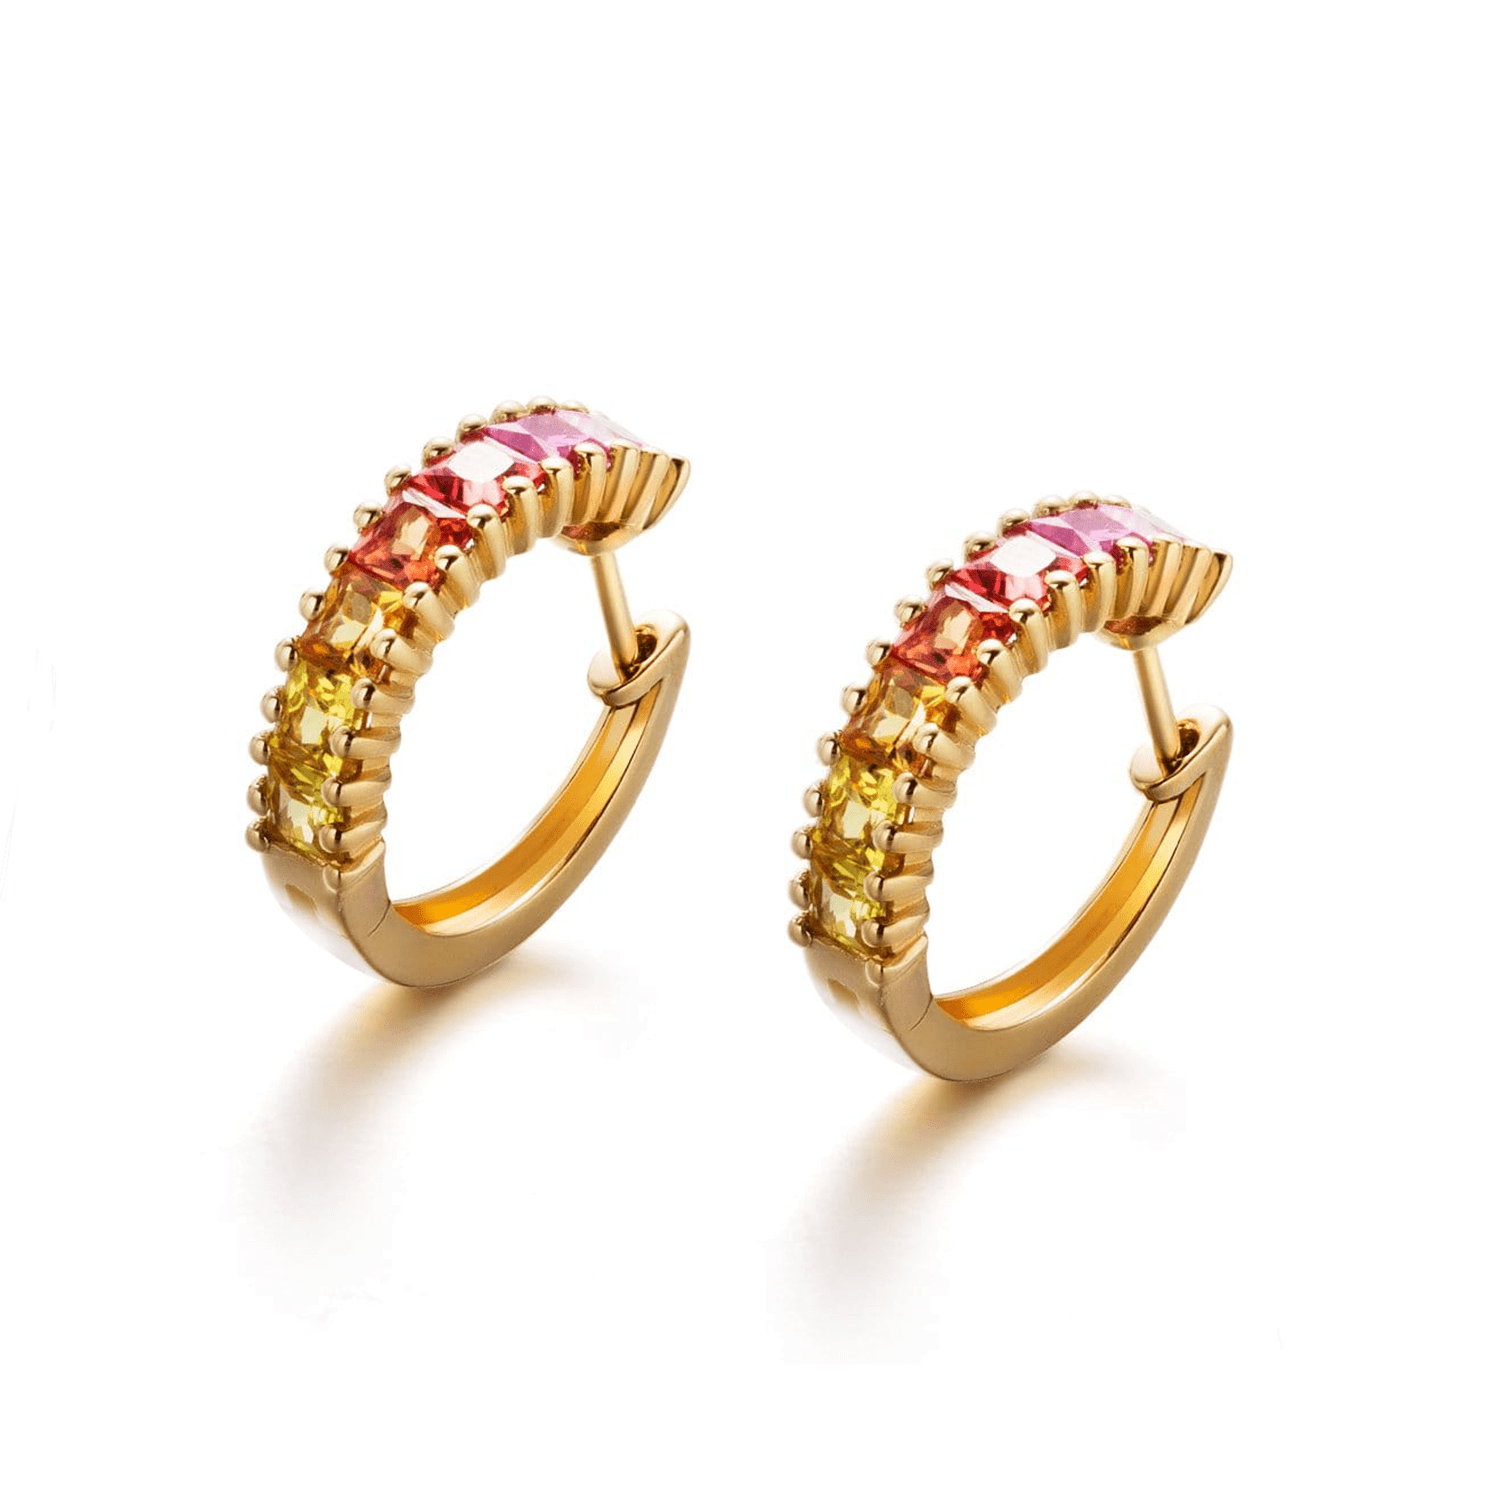 "Sunrise" Yellow And Red Color Sapphire Hoop Earrings In 18K Yellow Gold - FANCI.ME